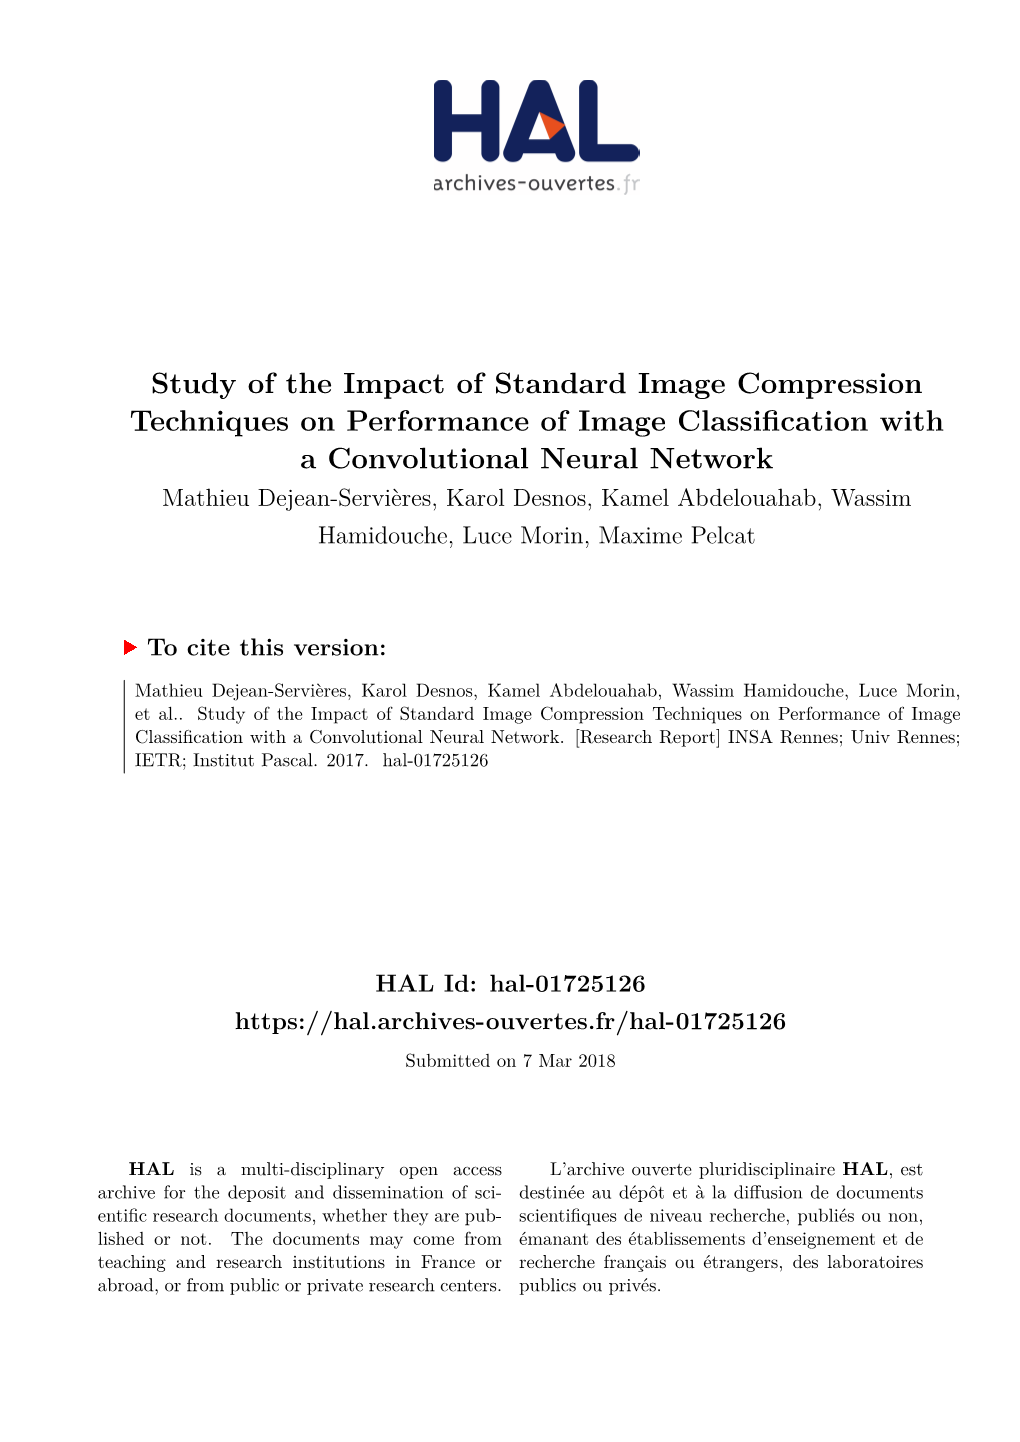 Study of the Impact of Standard Image Compression Techniques On